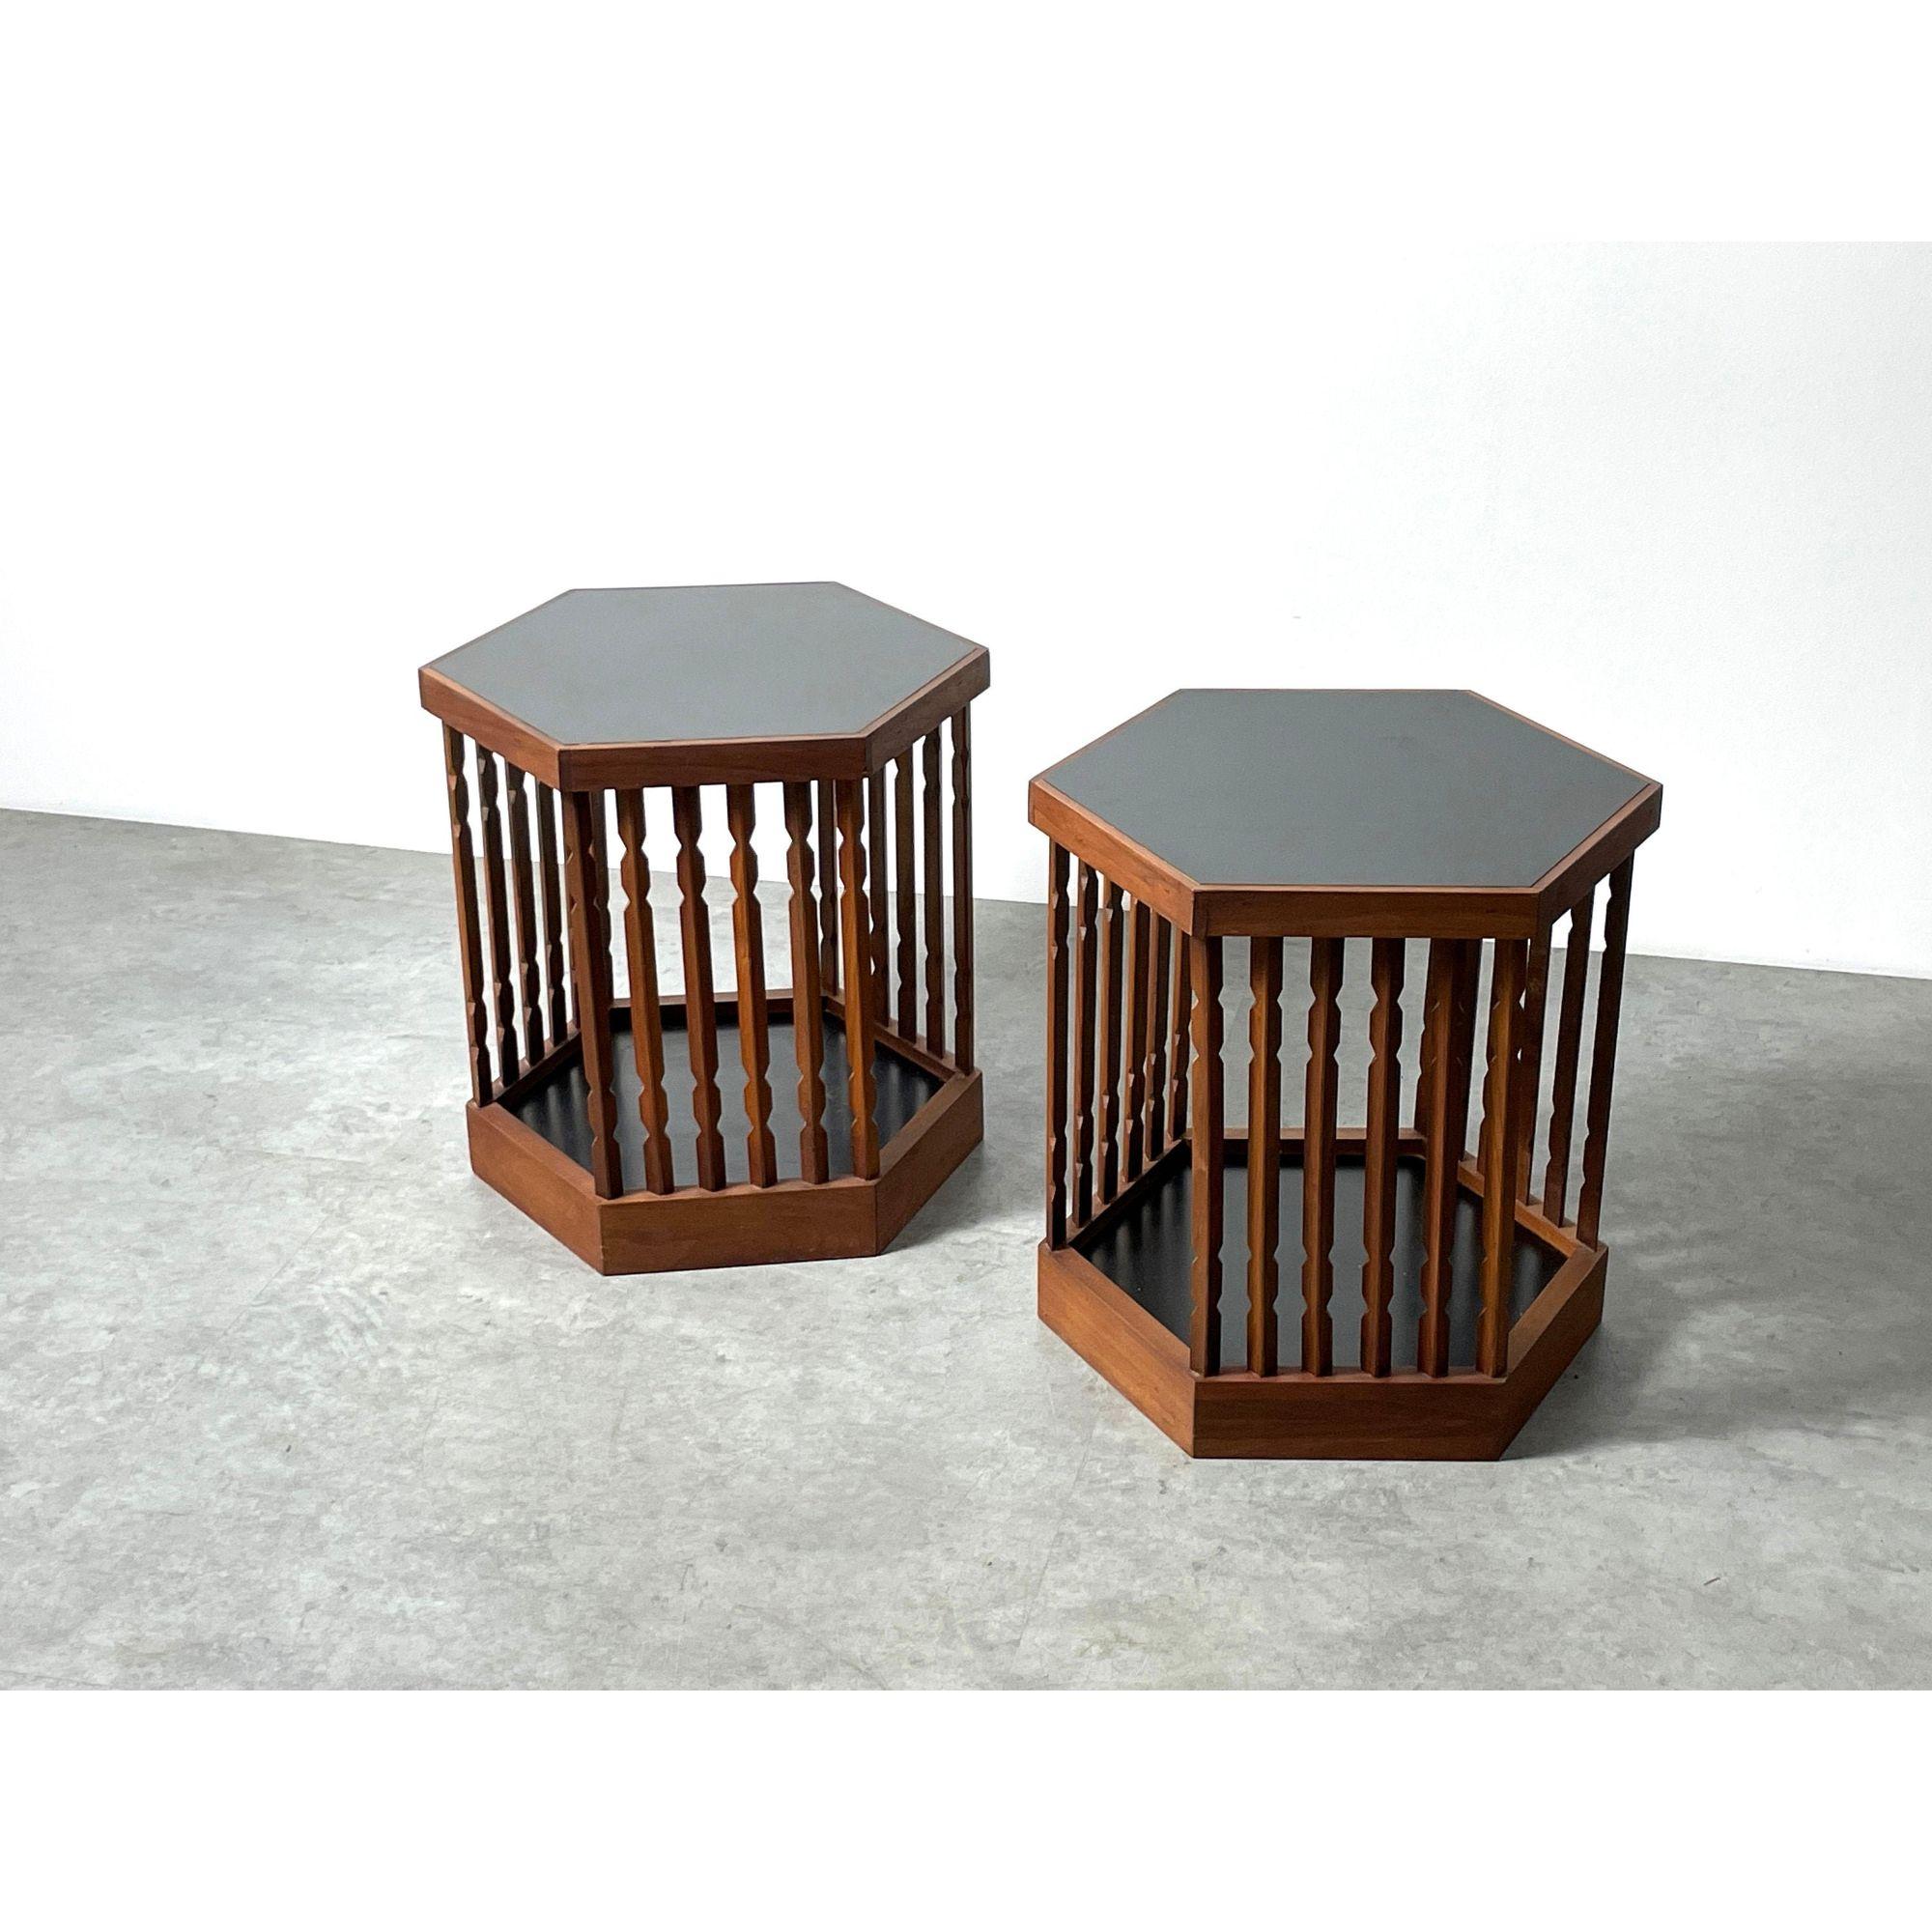 Pair Rare Arthur Umanoff Hexagon Spindle Cage Side Tables 

Pair of side tables designed by Arthur Umanoff for Washington Woodcraft 1960s
Hexagon form with carved walnut spindles and black laminate surface

Additional Information:
Materials: